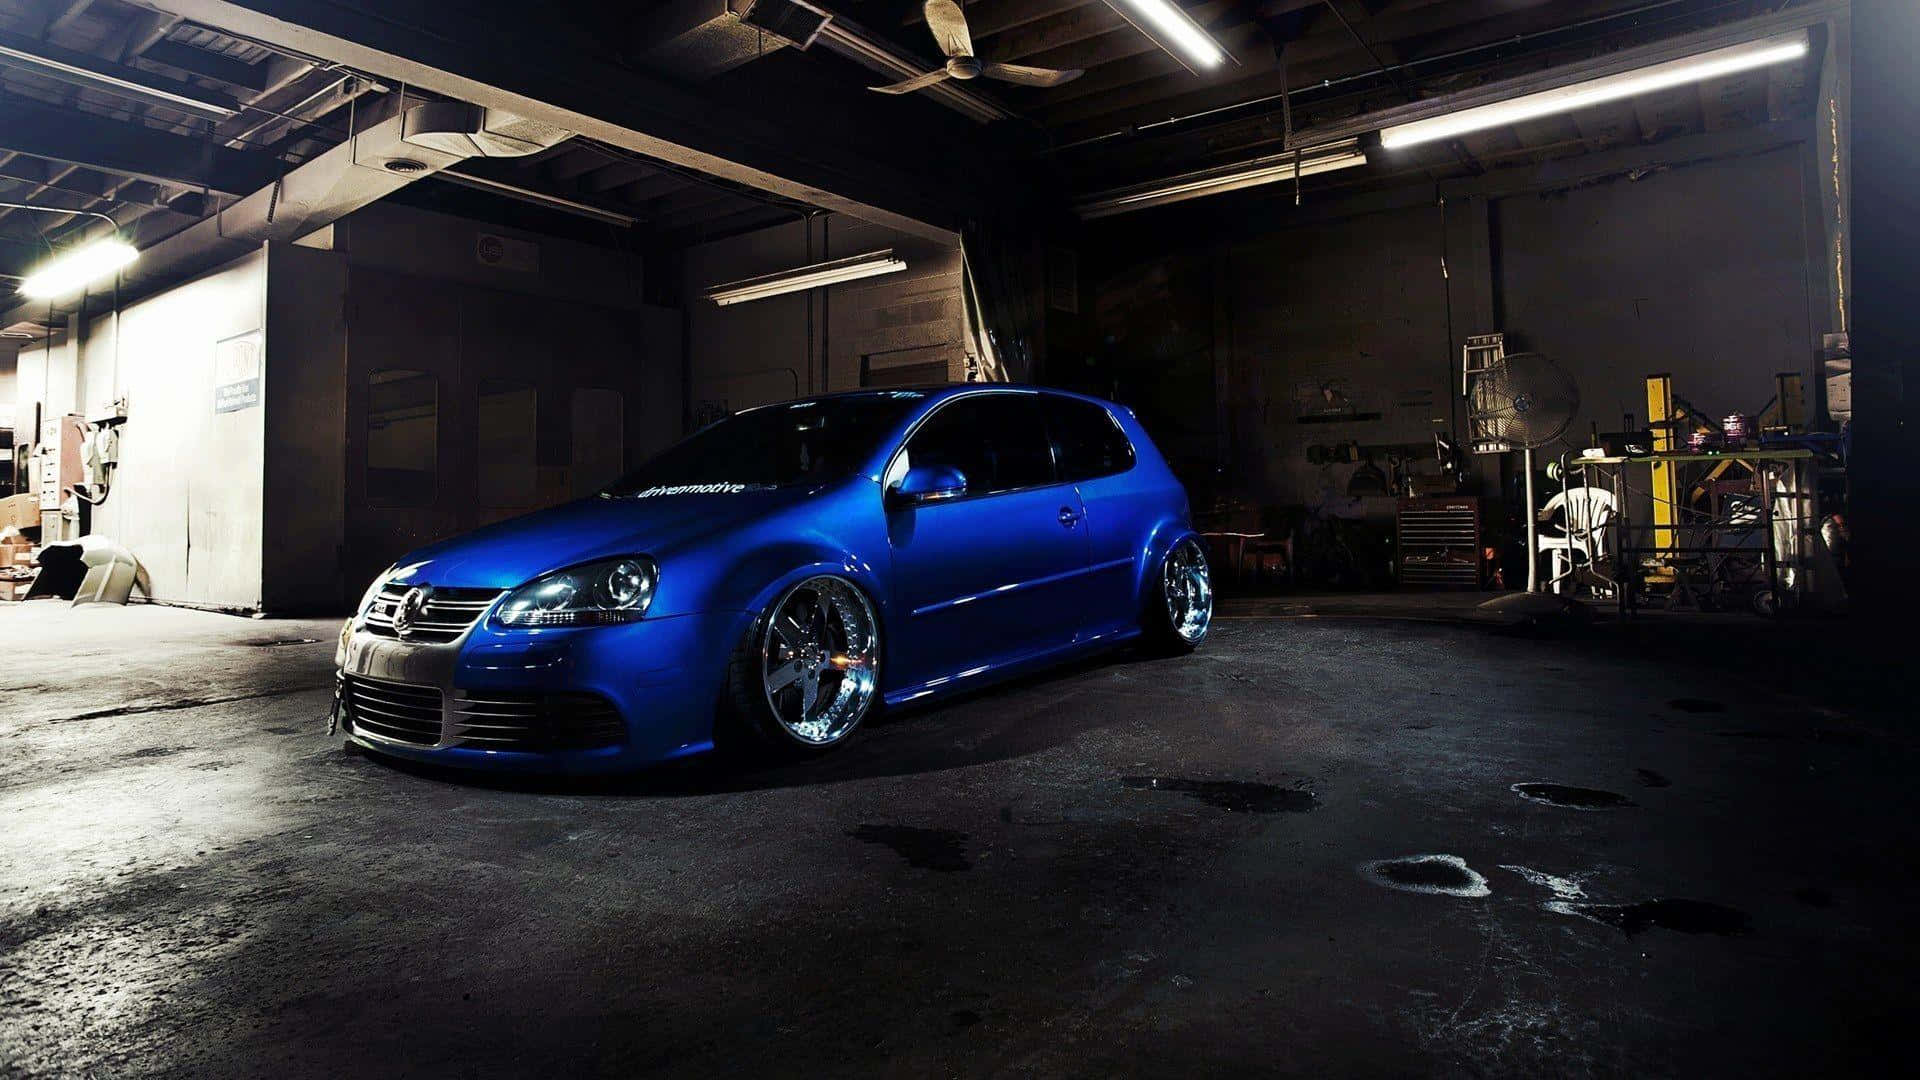 Sleek, Customized Tuned Car on the Road Wallpaper